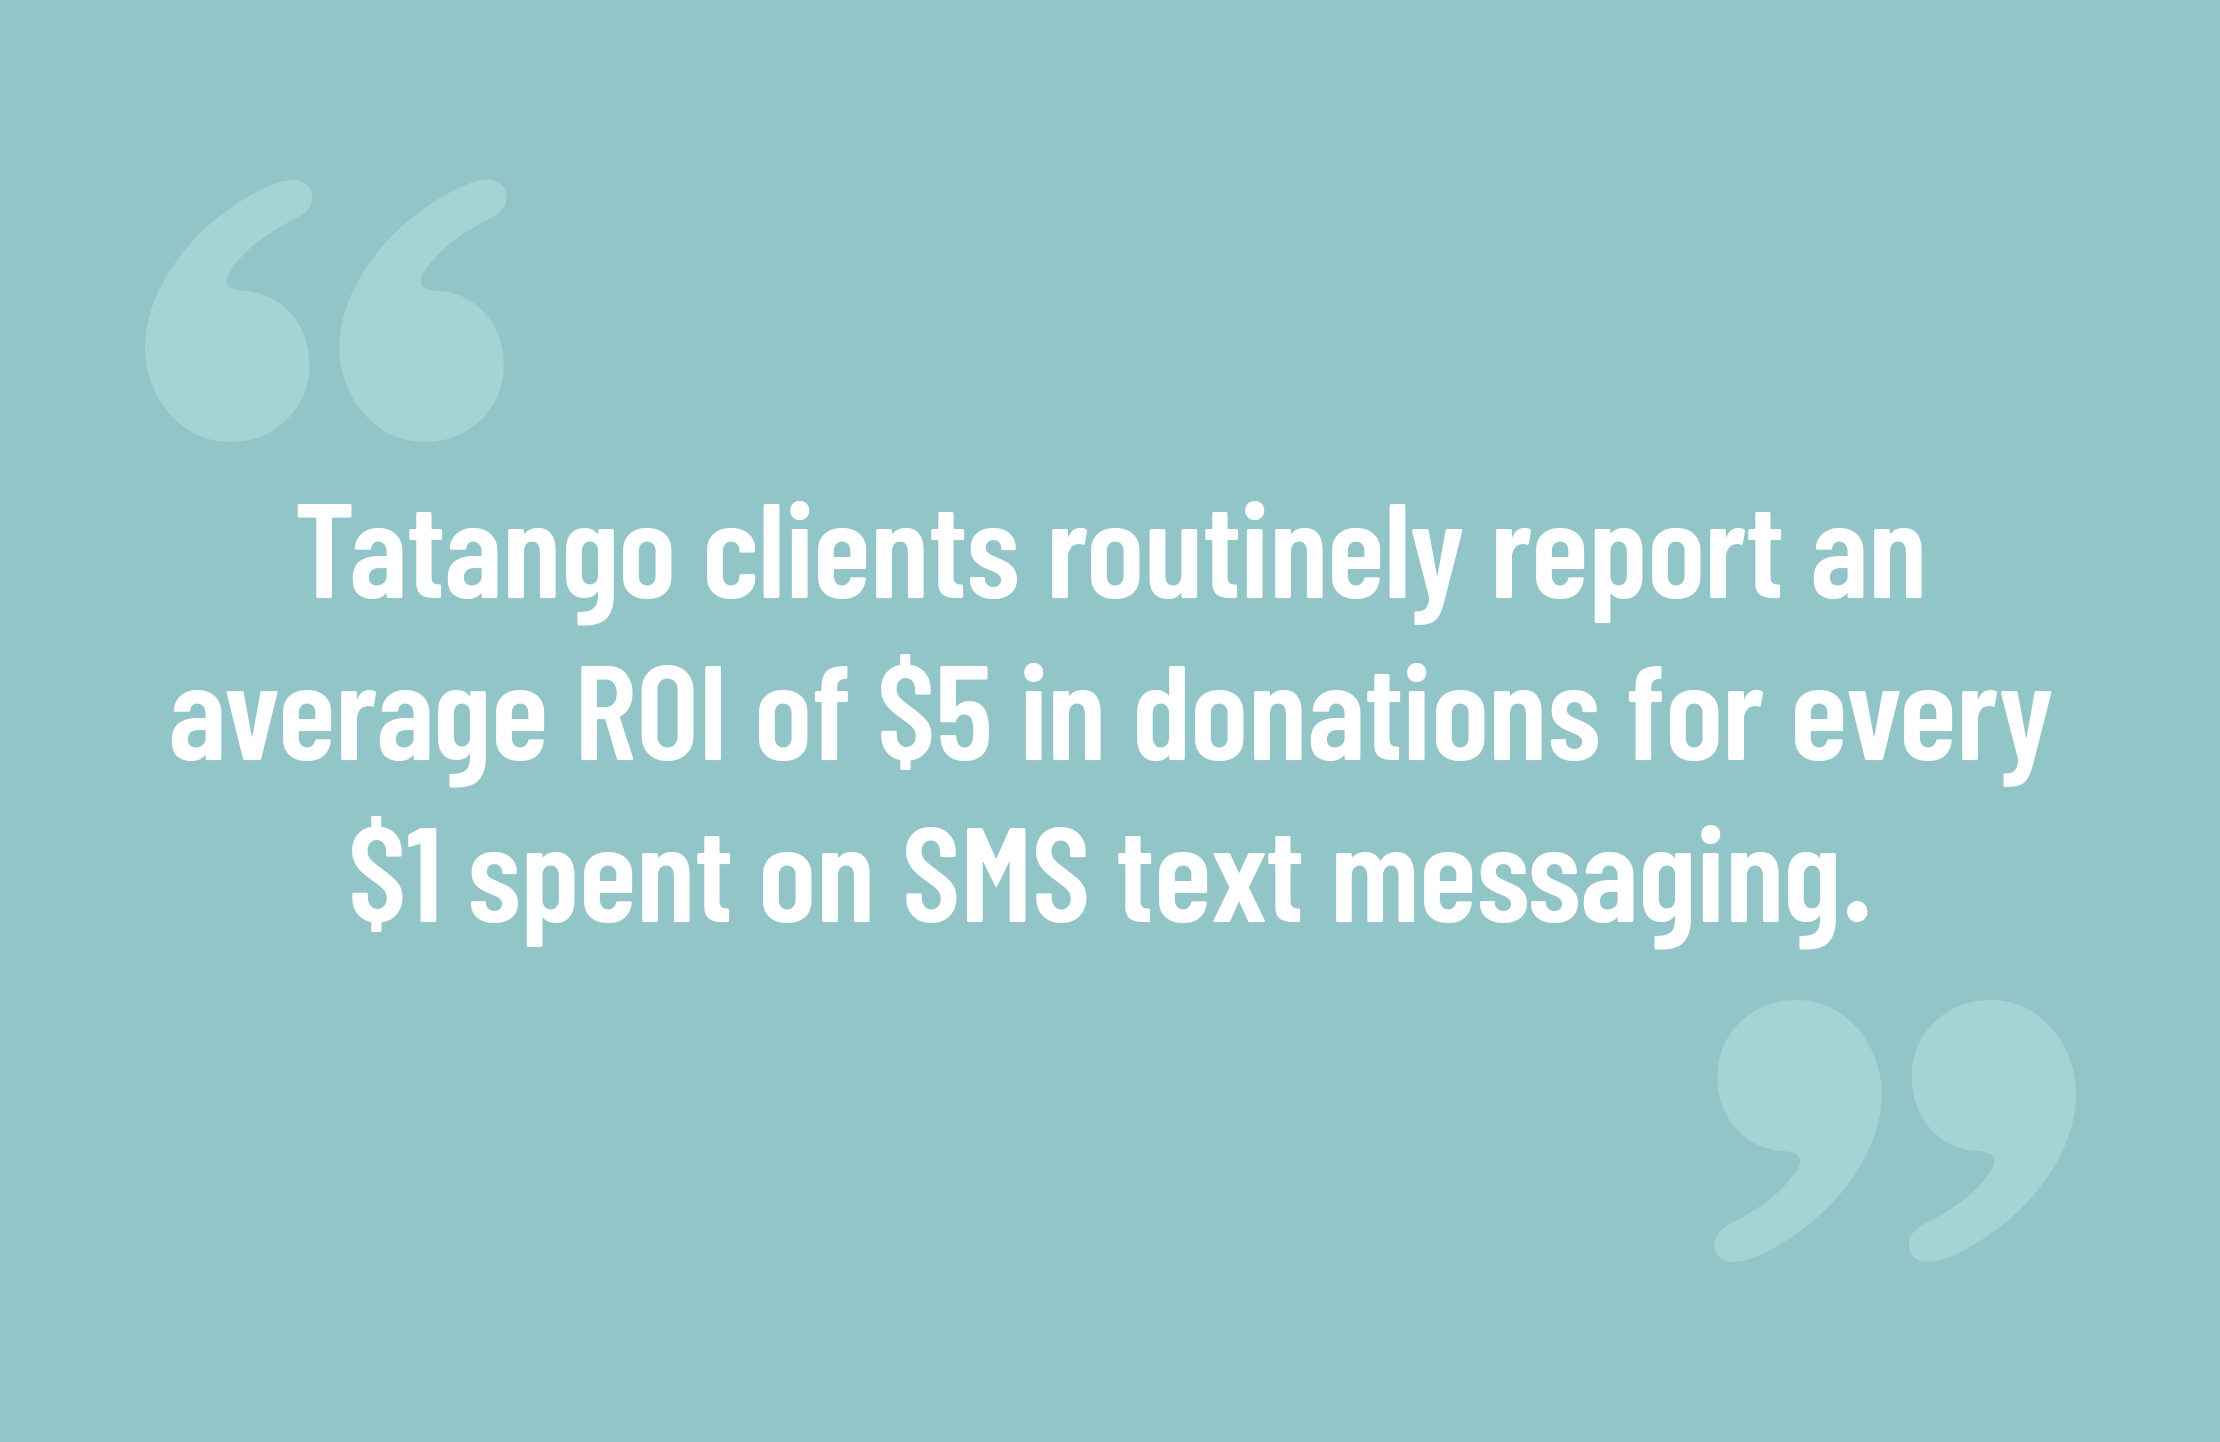 How to Grow Your Donor Base for SMS Nonprofit Marketing